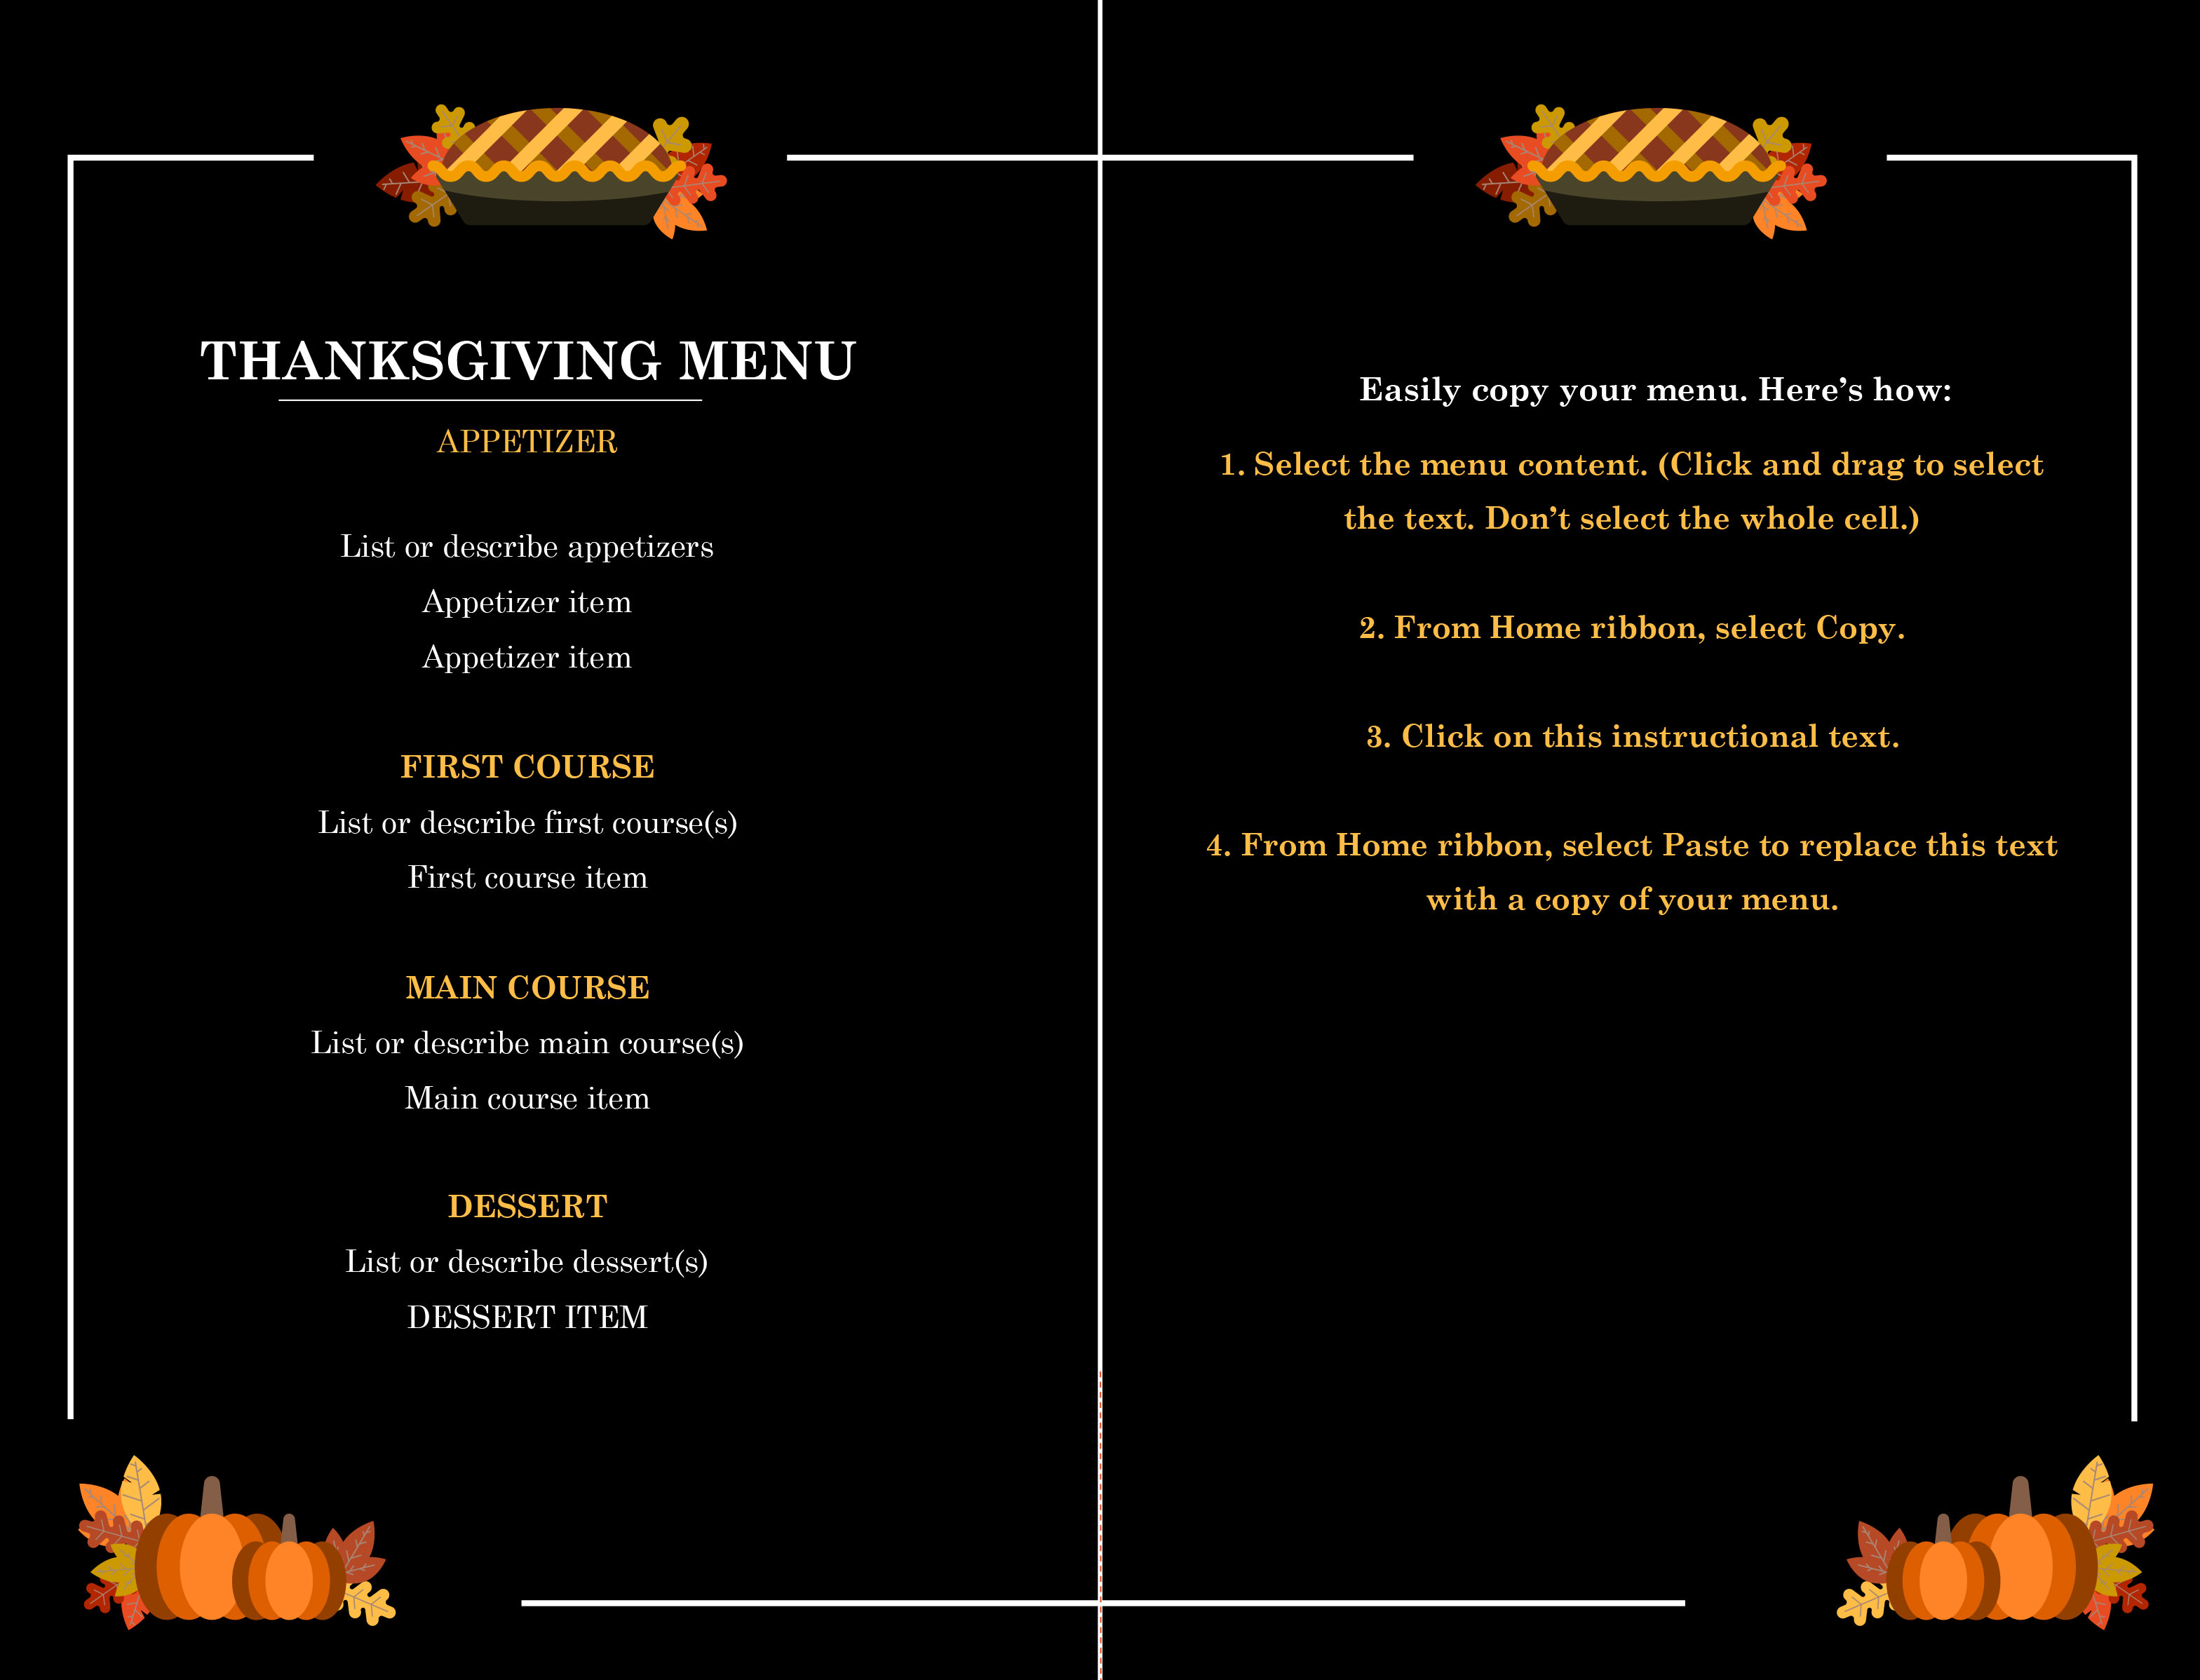 20 Free Simple Menu Templates For Restaurants, Cafes, And Parties Regarding Design Your Own Menu Template